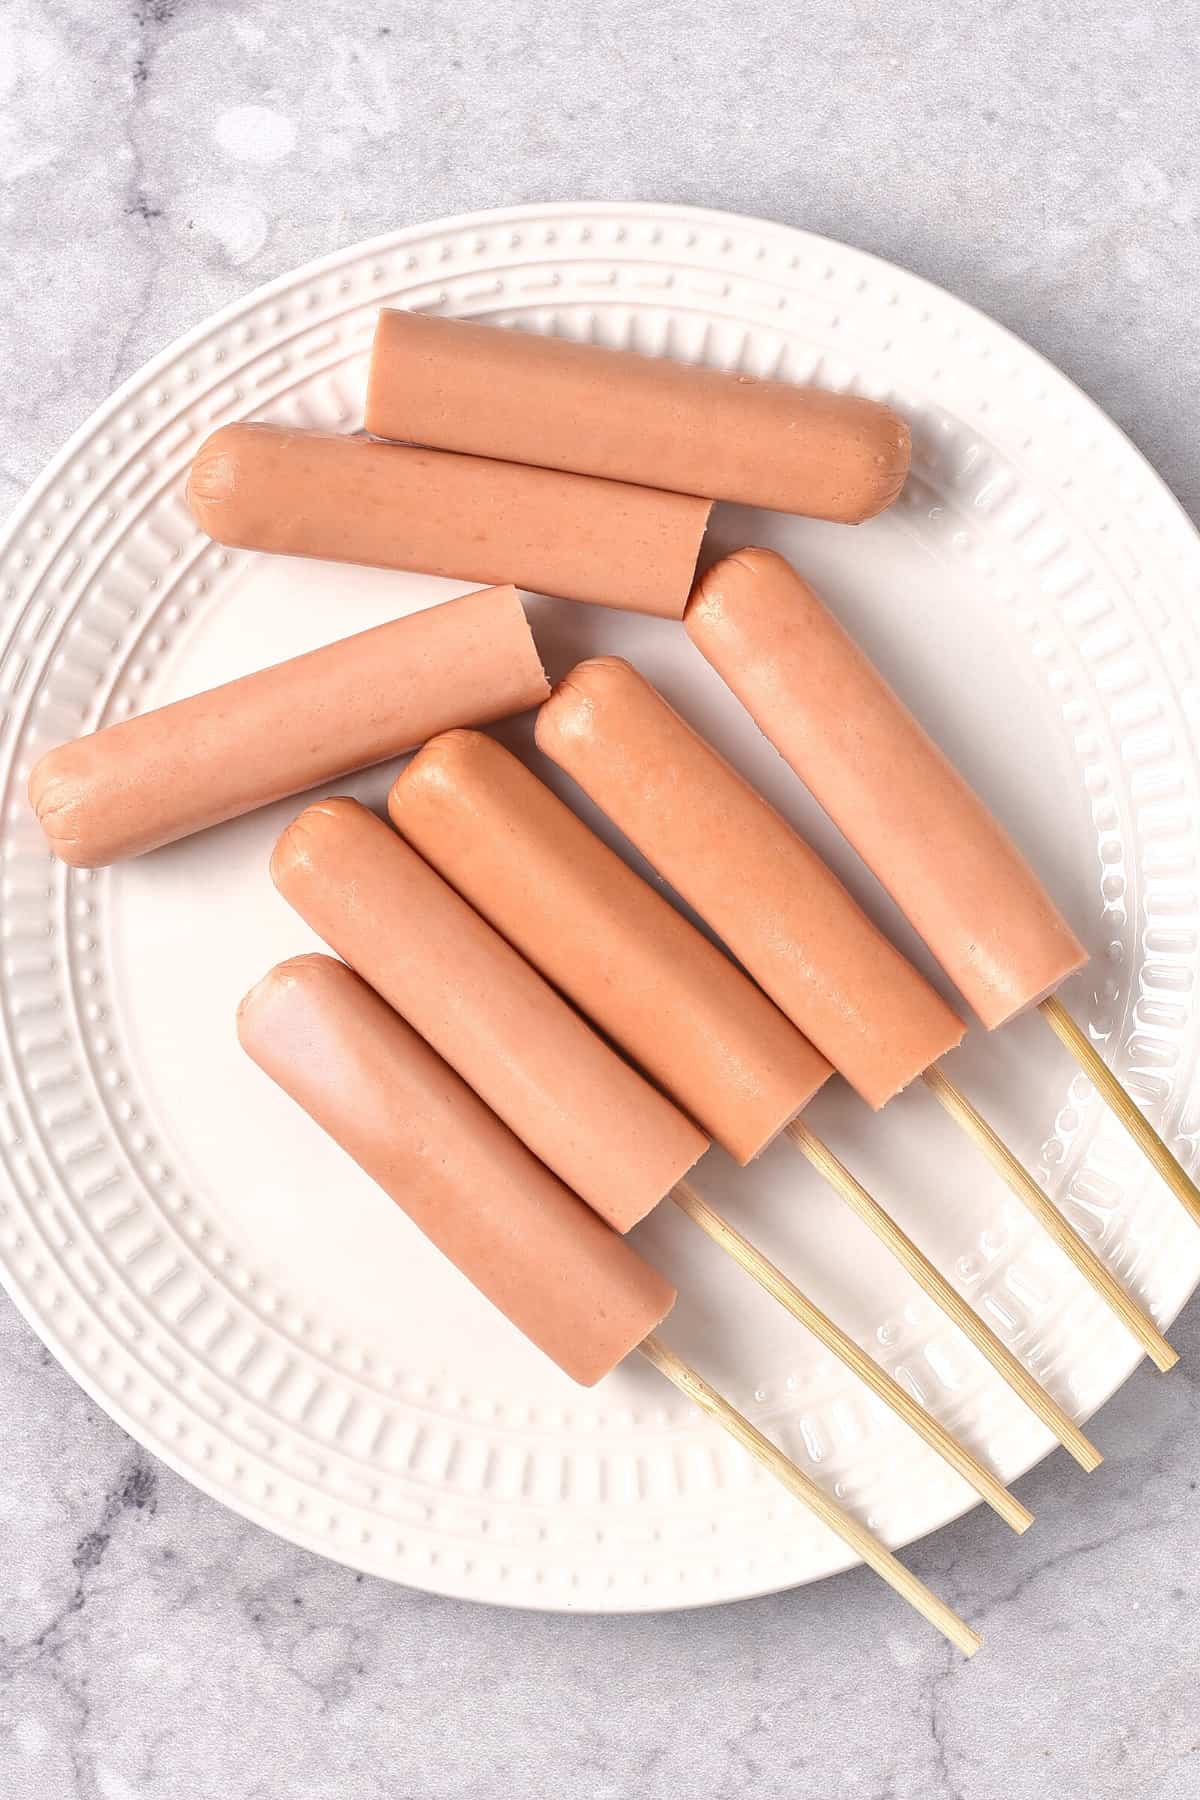 Hot dogs on skewers on white plate.